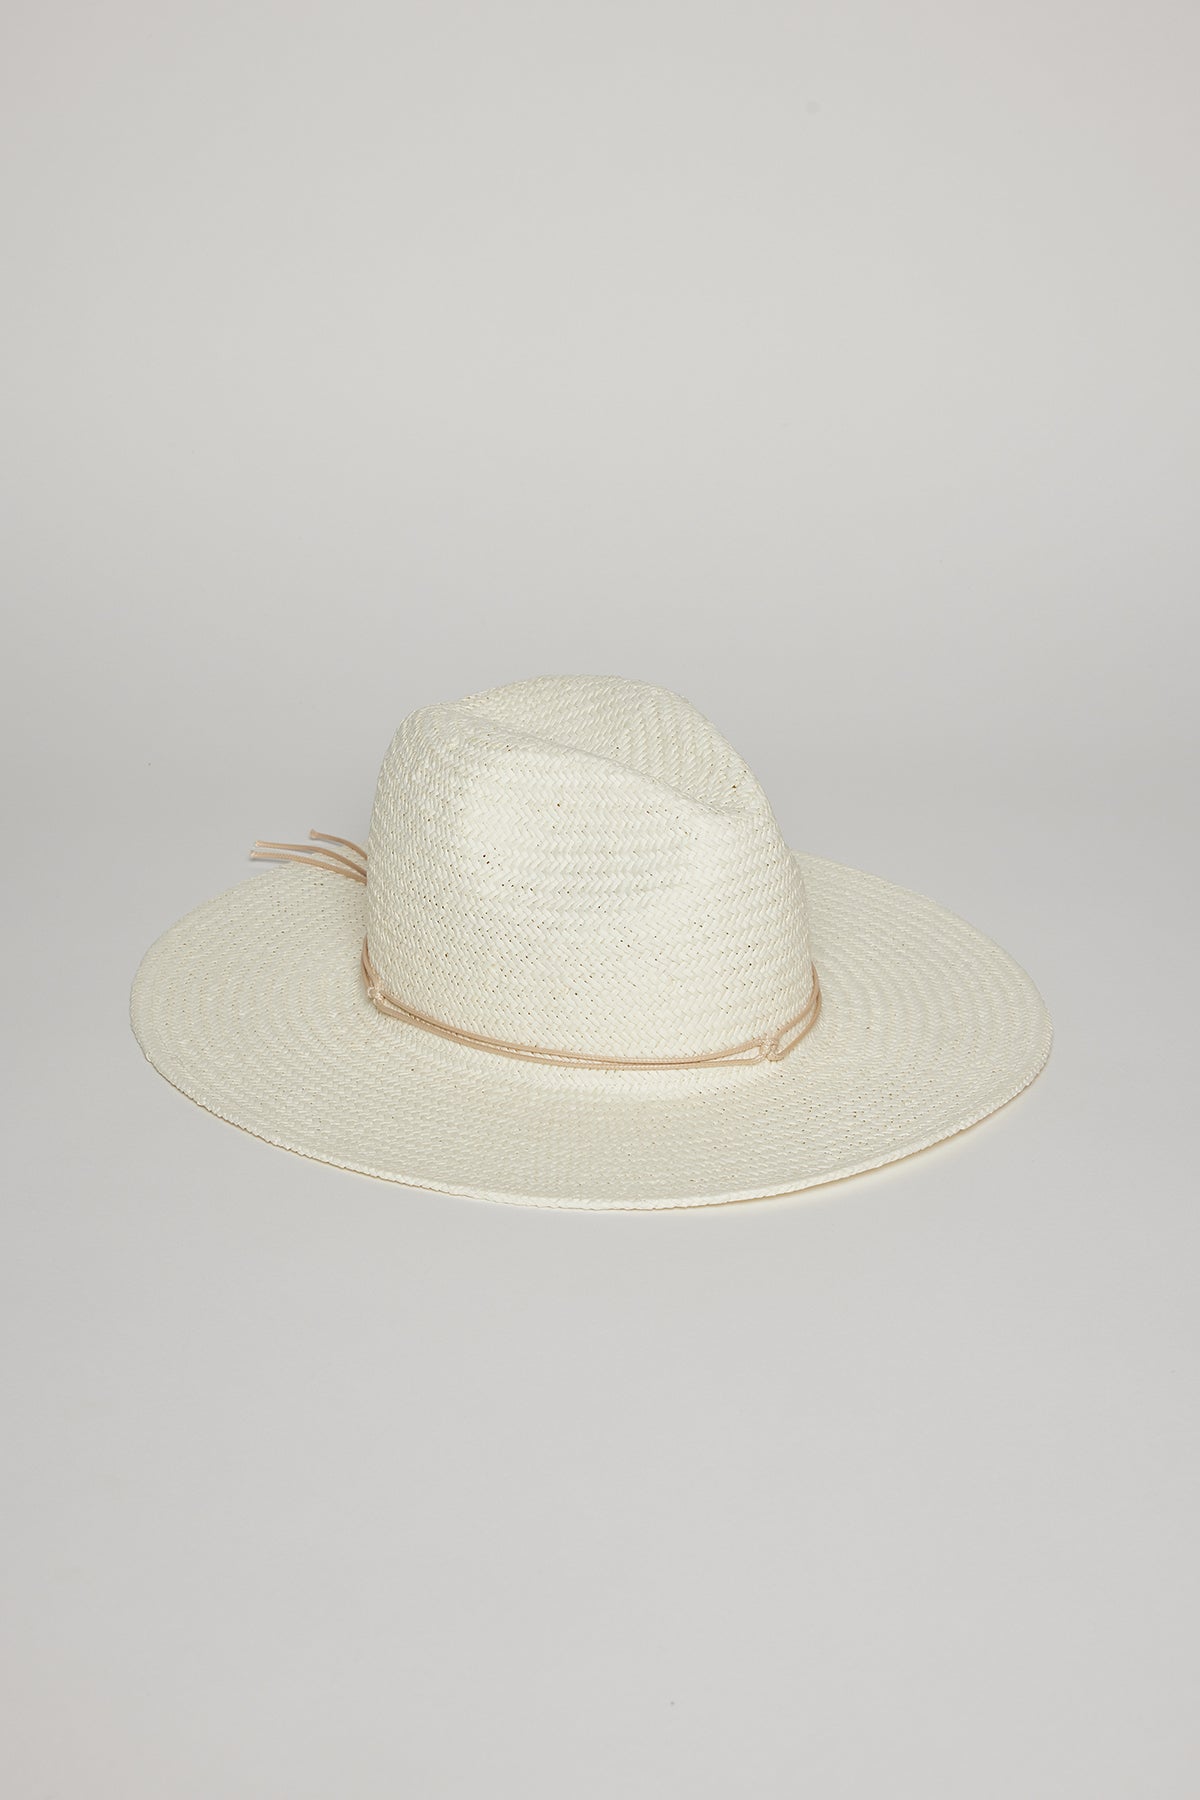   A white, wide-brimmed TRAVELER CONTINENTAL HAT by Velvet by Graham & Spencer with a beige band around the base of the crown, placed on a light grey surface. 